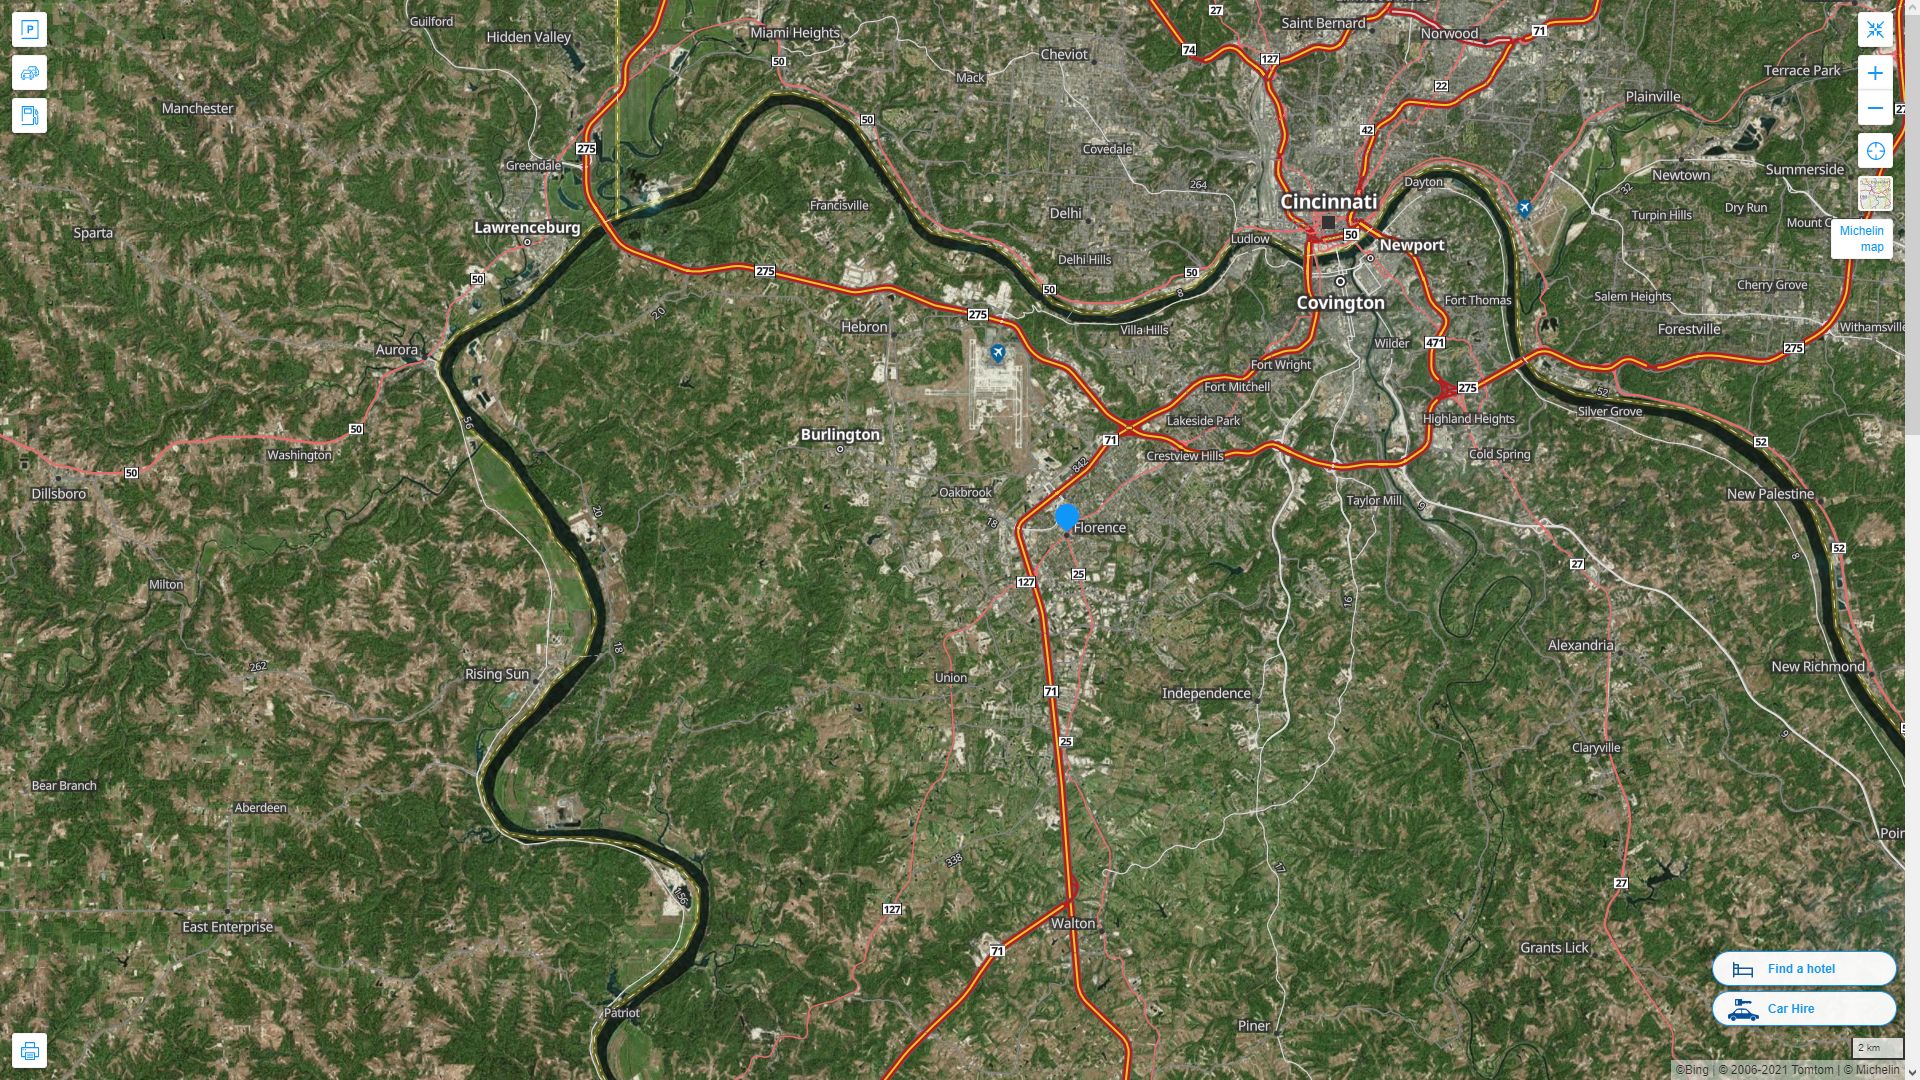 Florence Kentucky Highway and Road Map with Satellite View